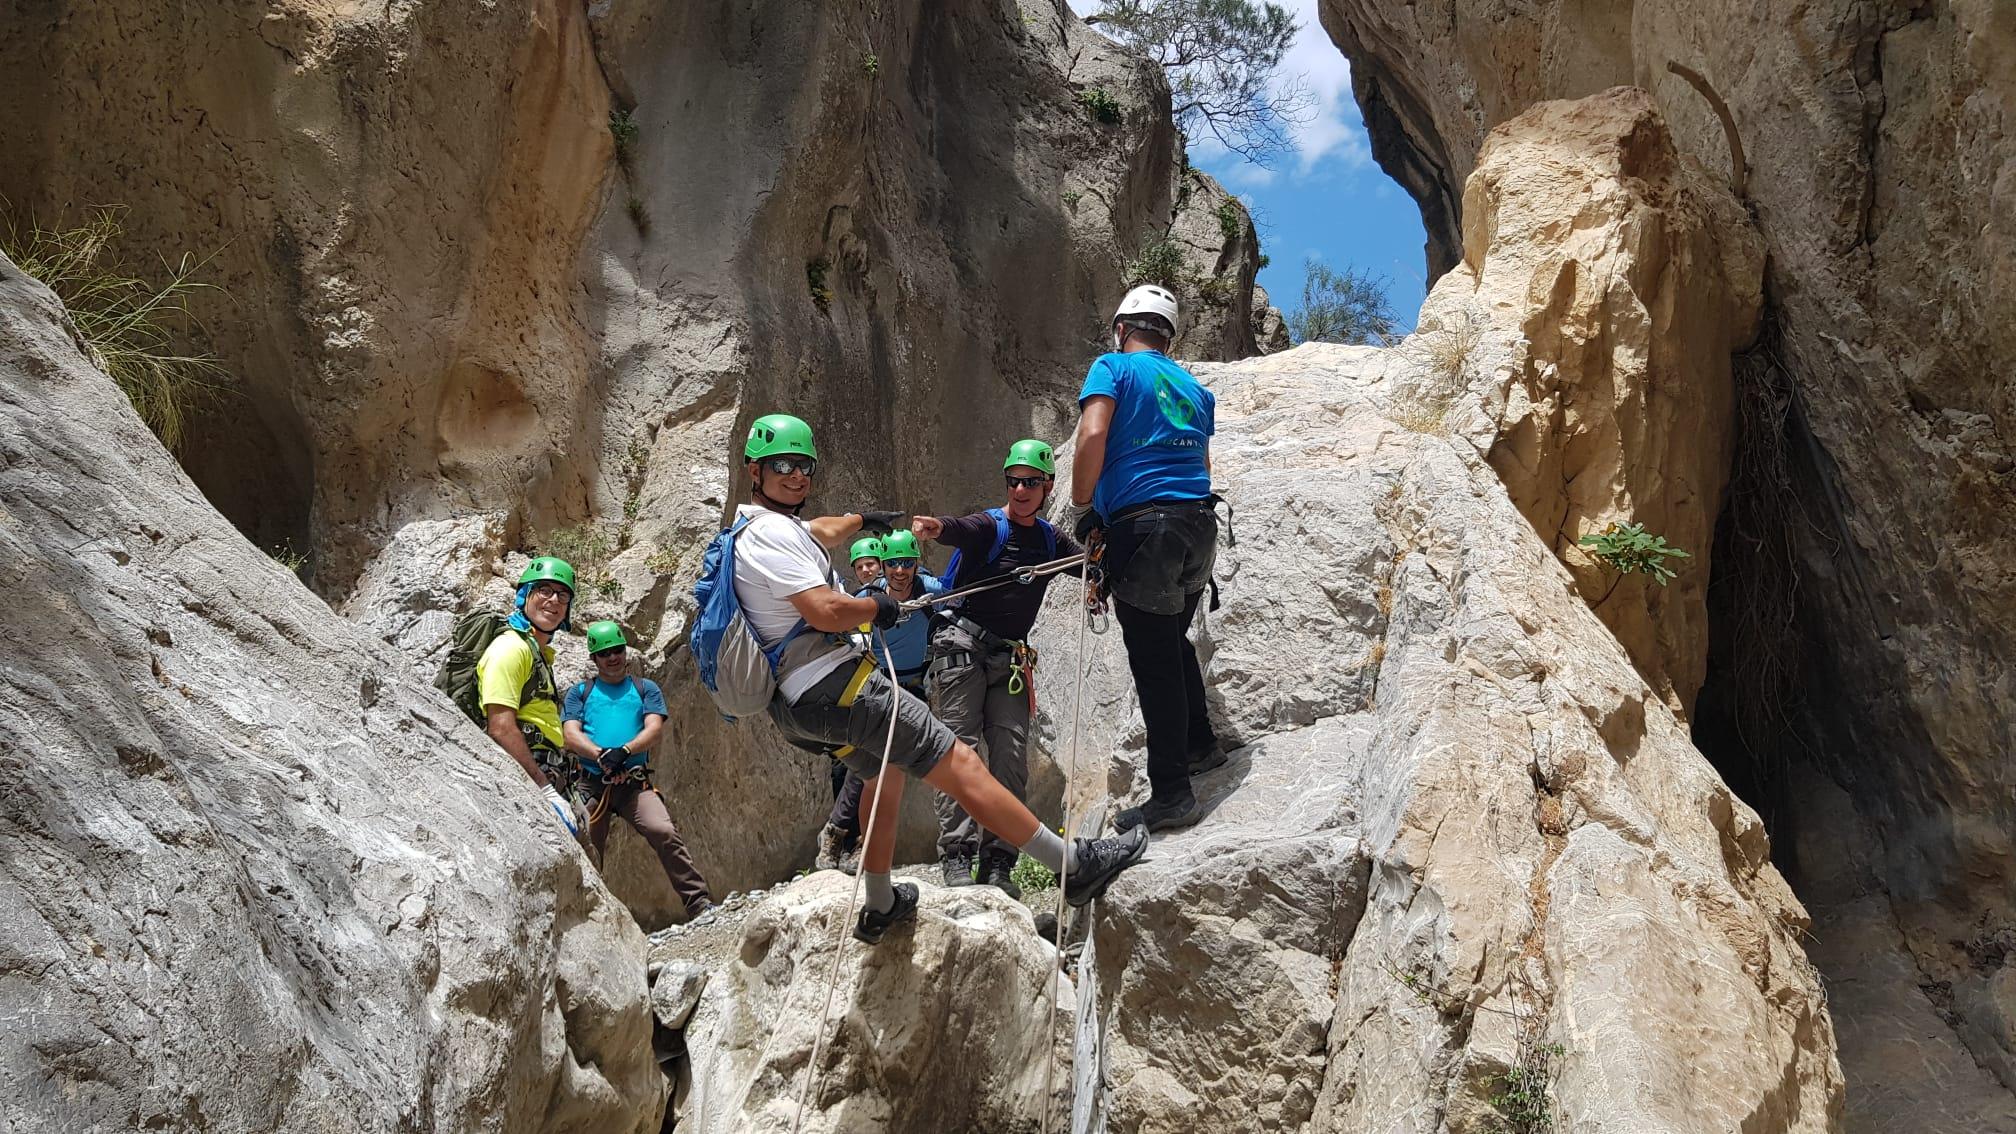 Canyoning in Crete